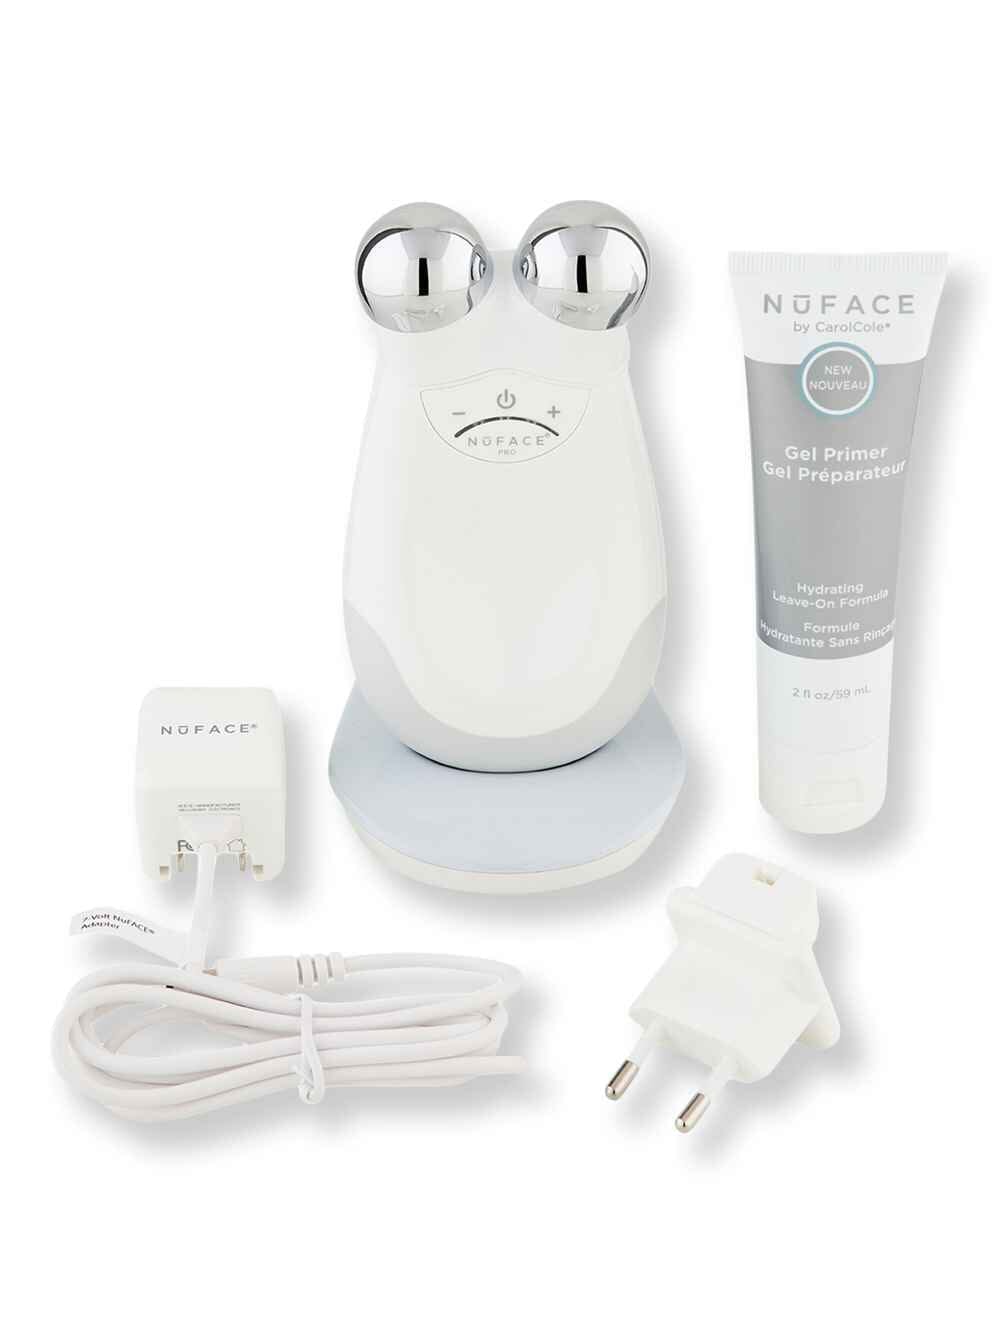 Nuface Nuface Trinity Pro Facial Toning Device with Gel Primer 2 oz59 ml Skin Care Tools & Devices 